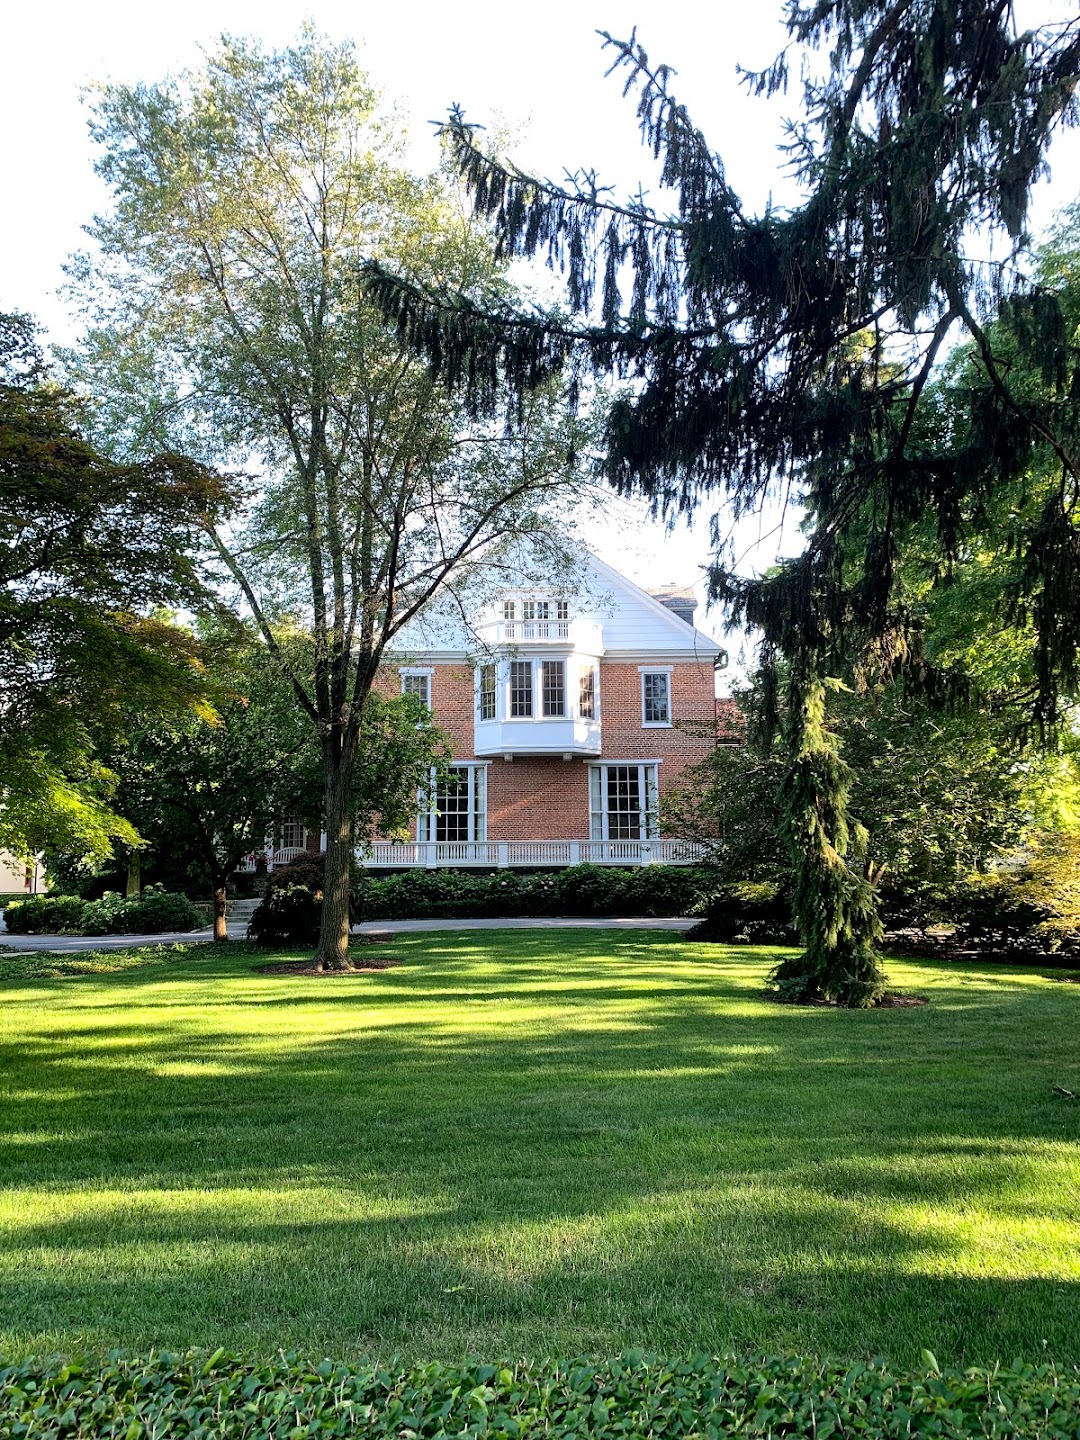 Dickinson College Presidents House